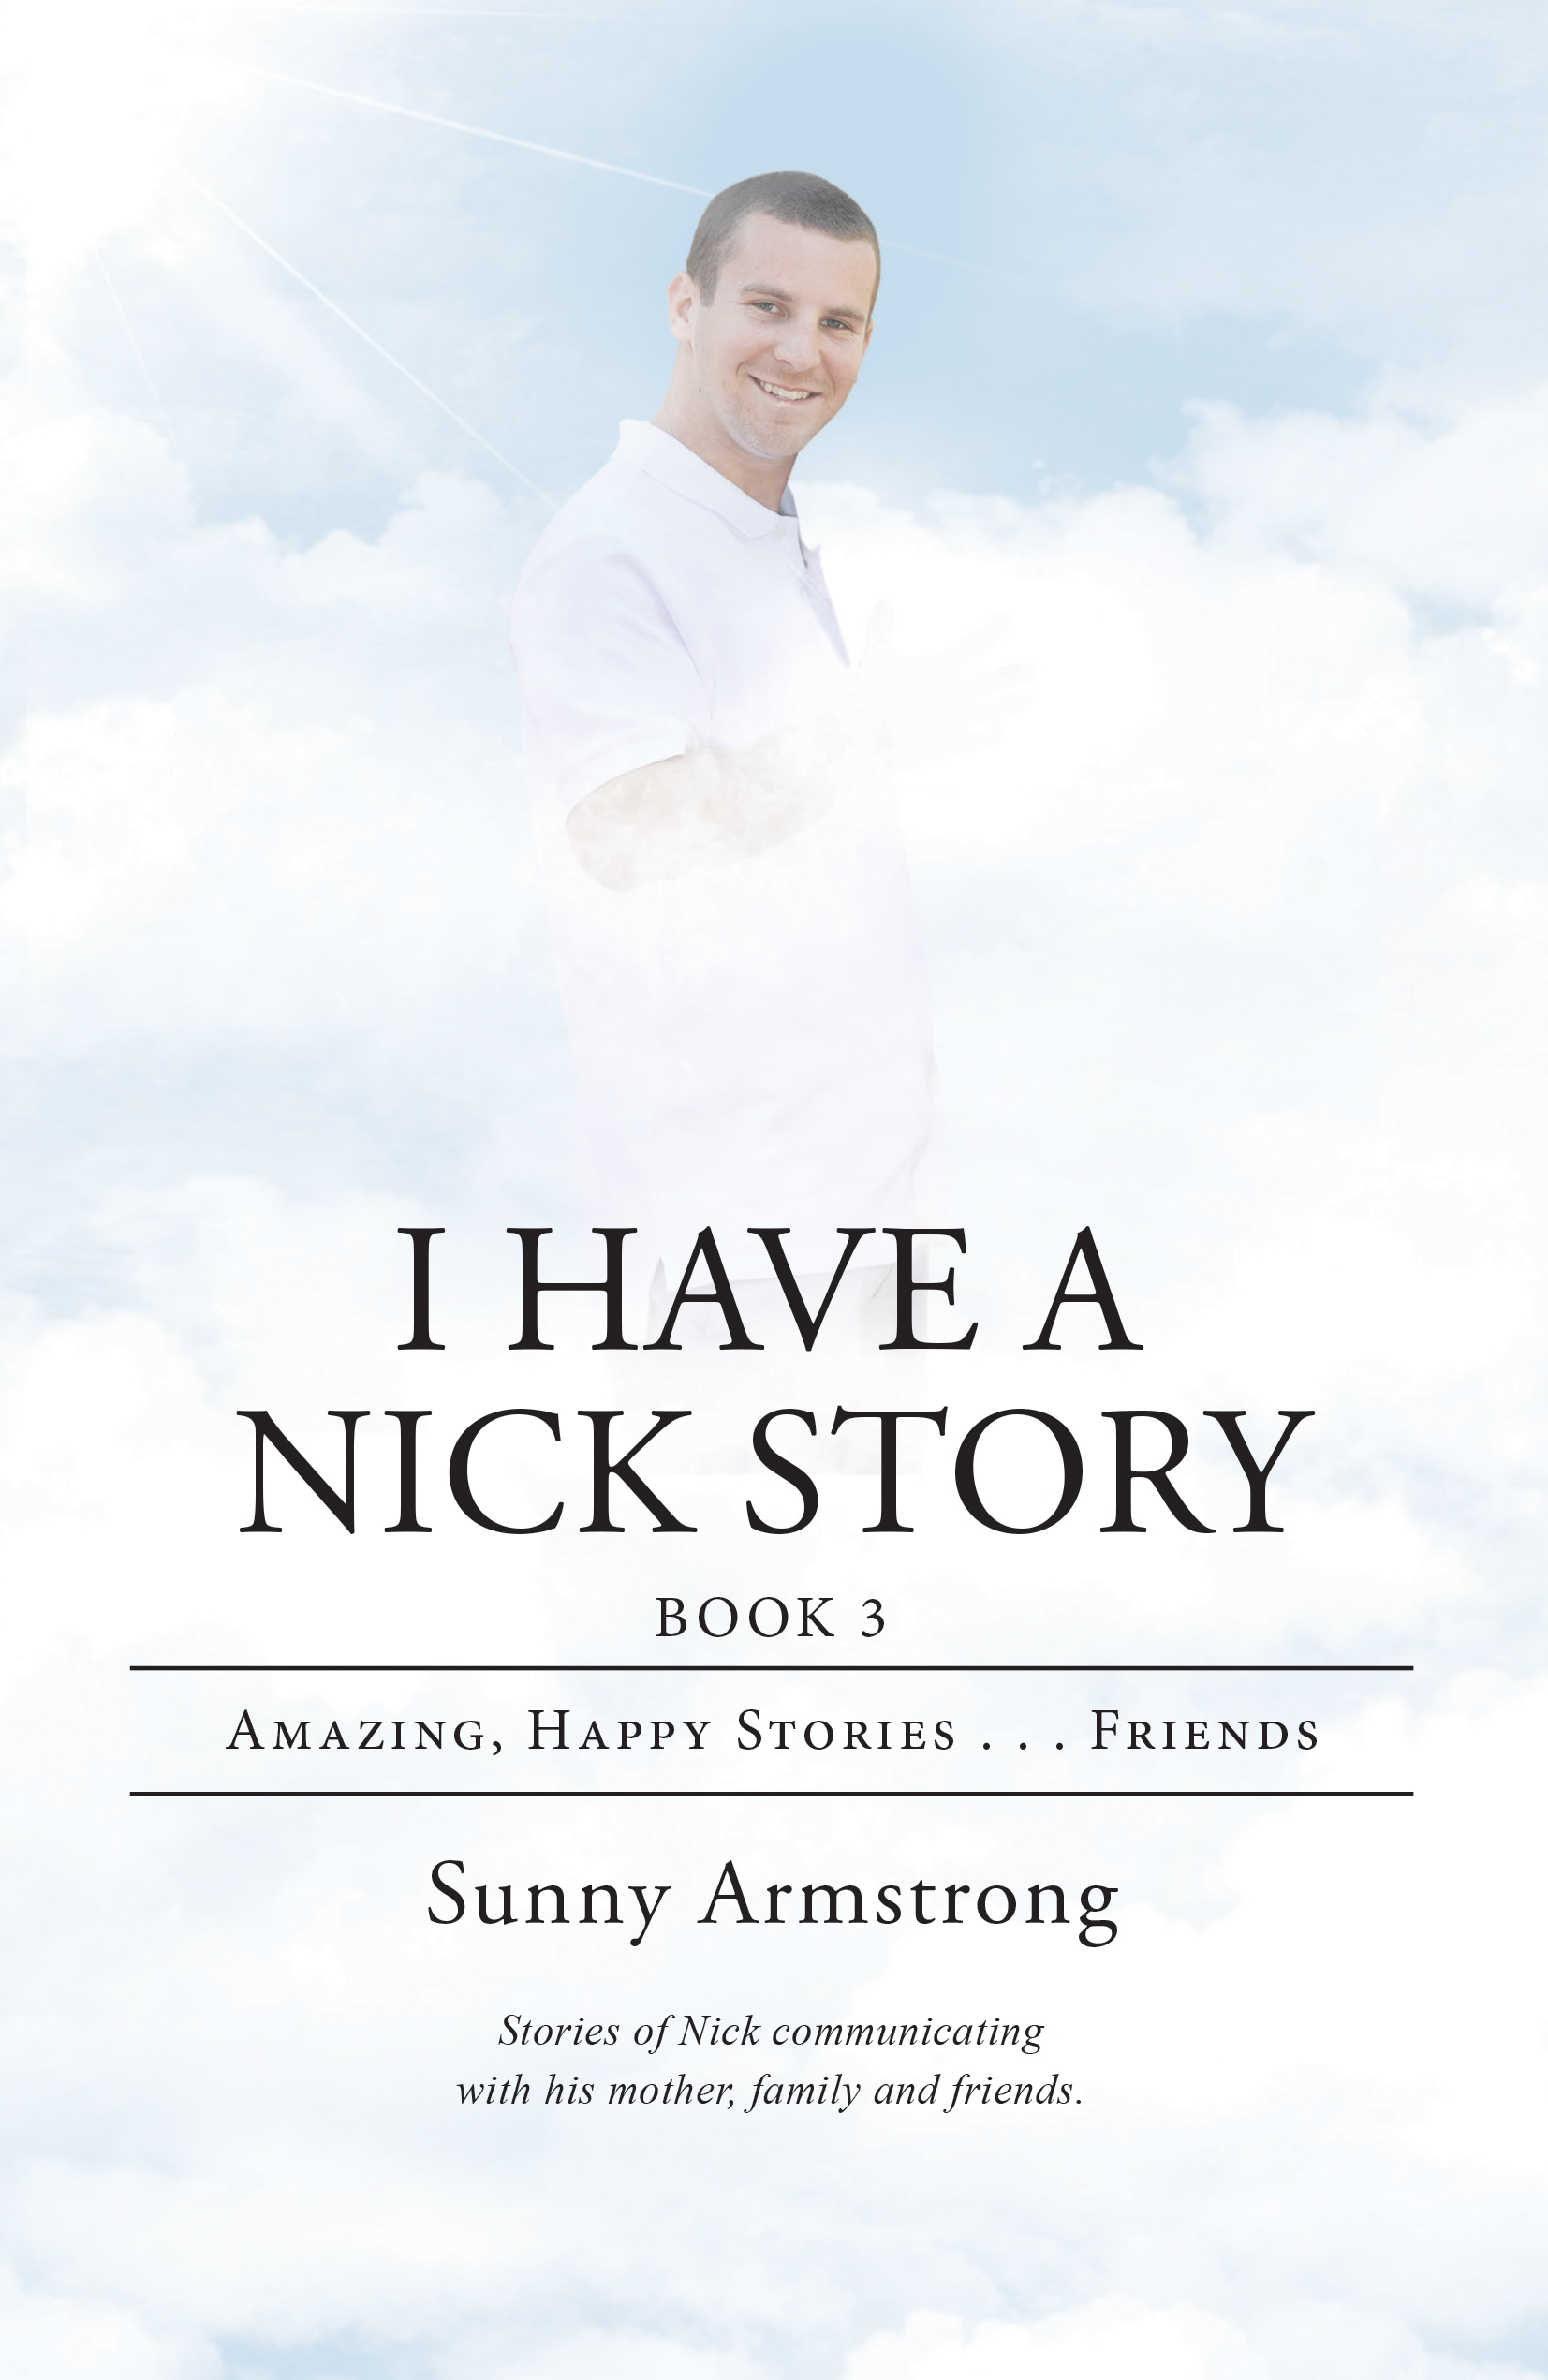 “I Have a Nick Story Book 3: Amazing, Happy Stories…Friends”
By Sunny Armstrong 
